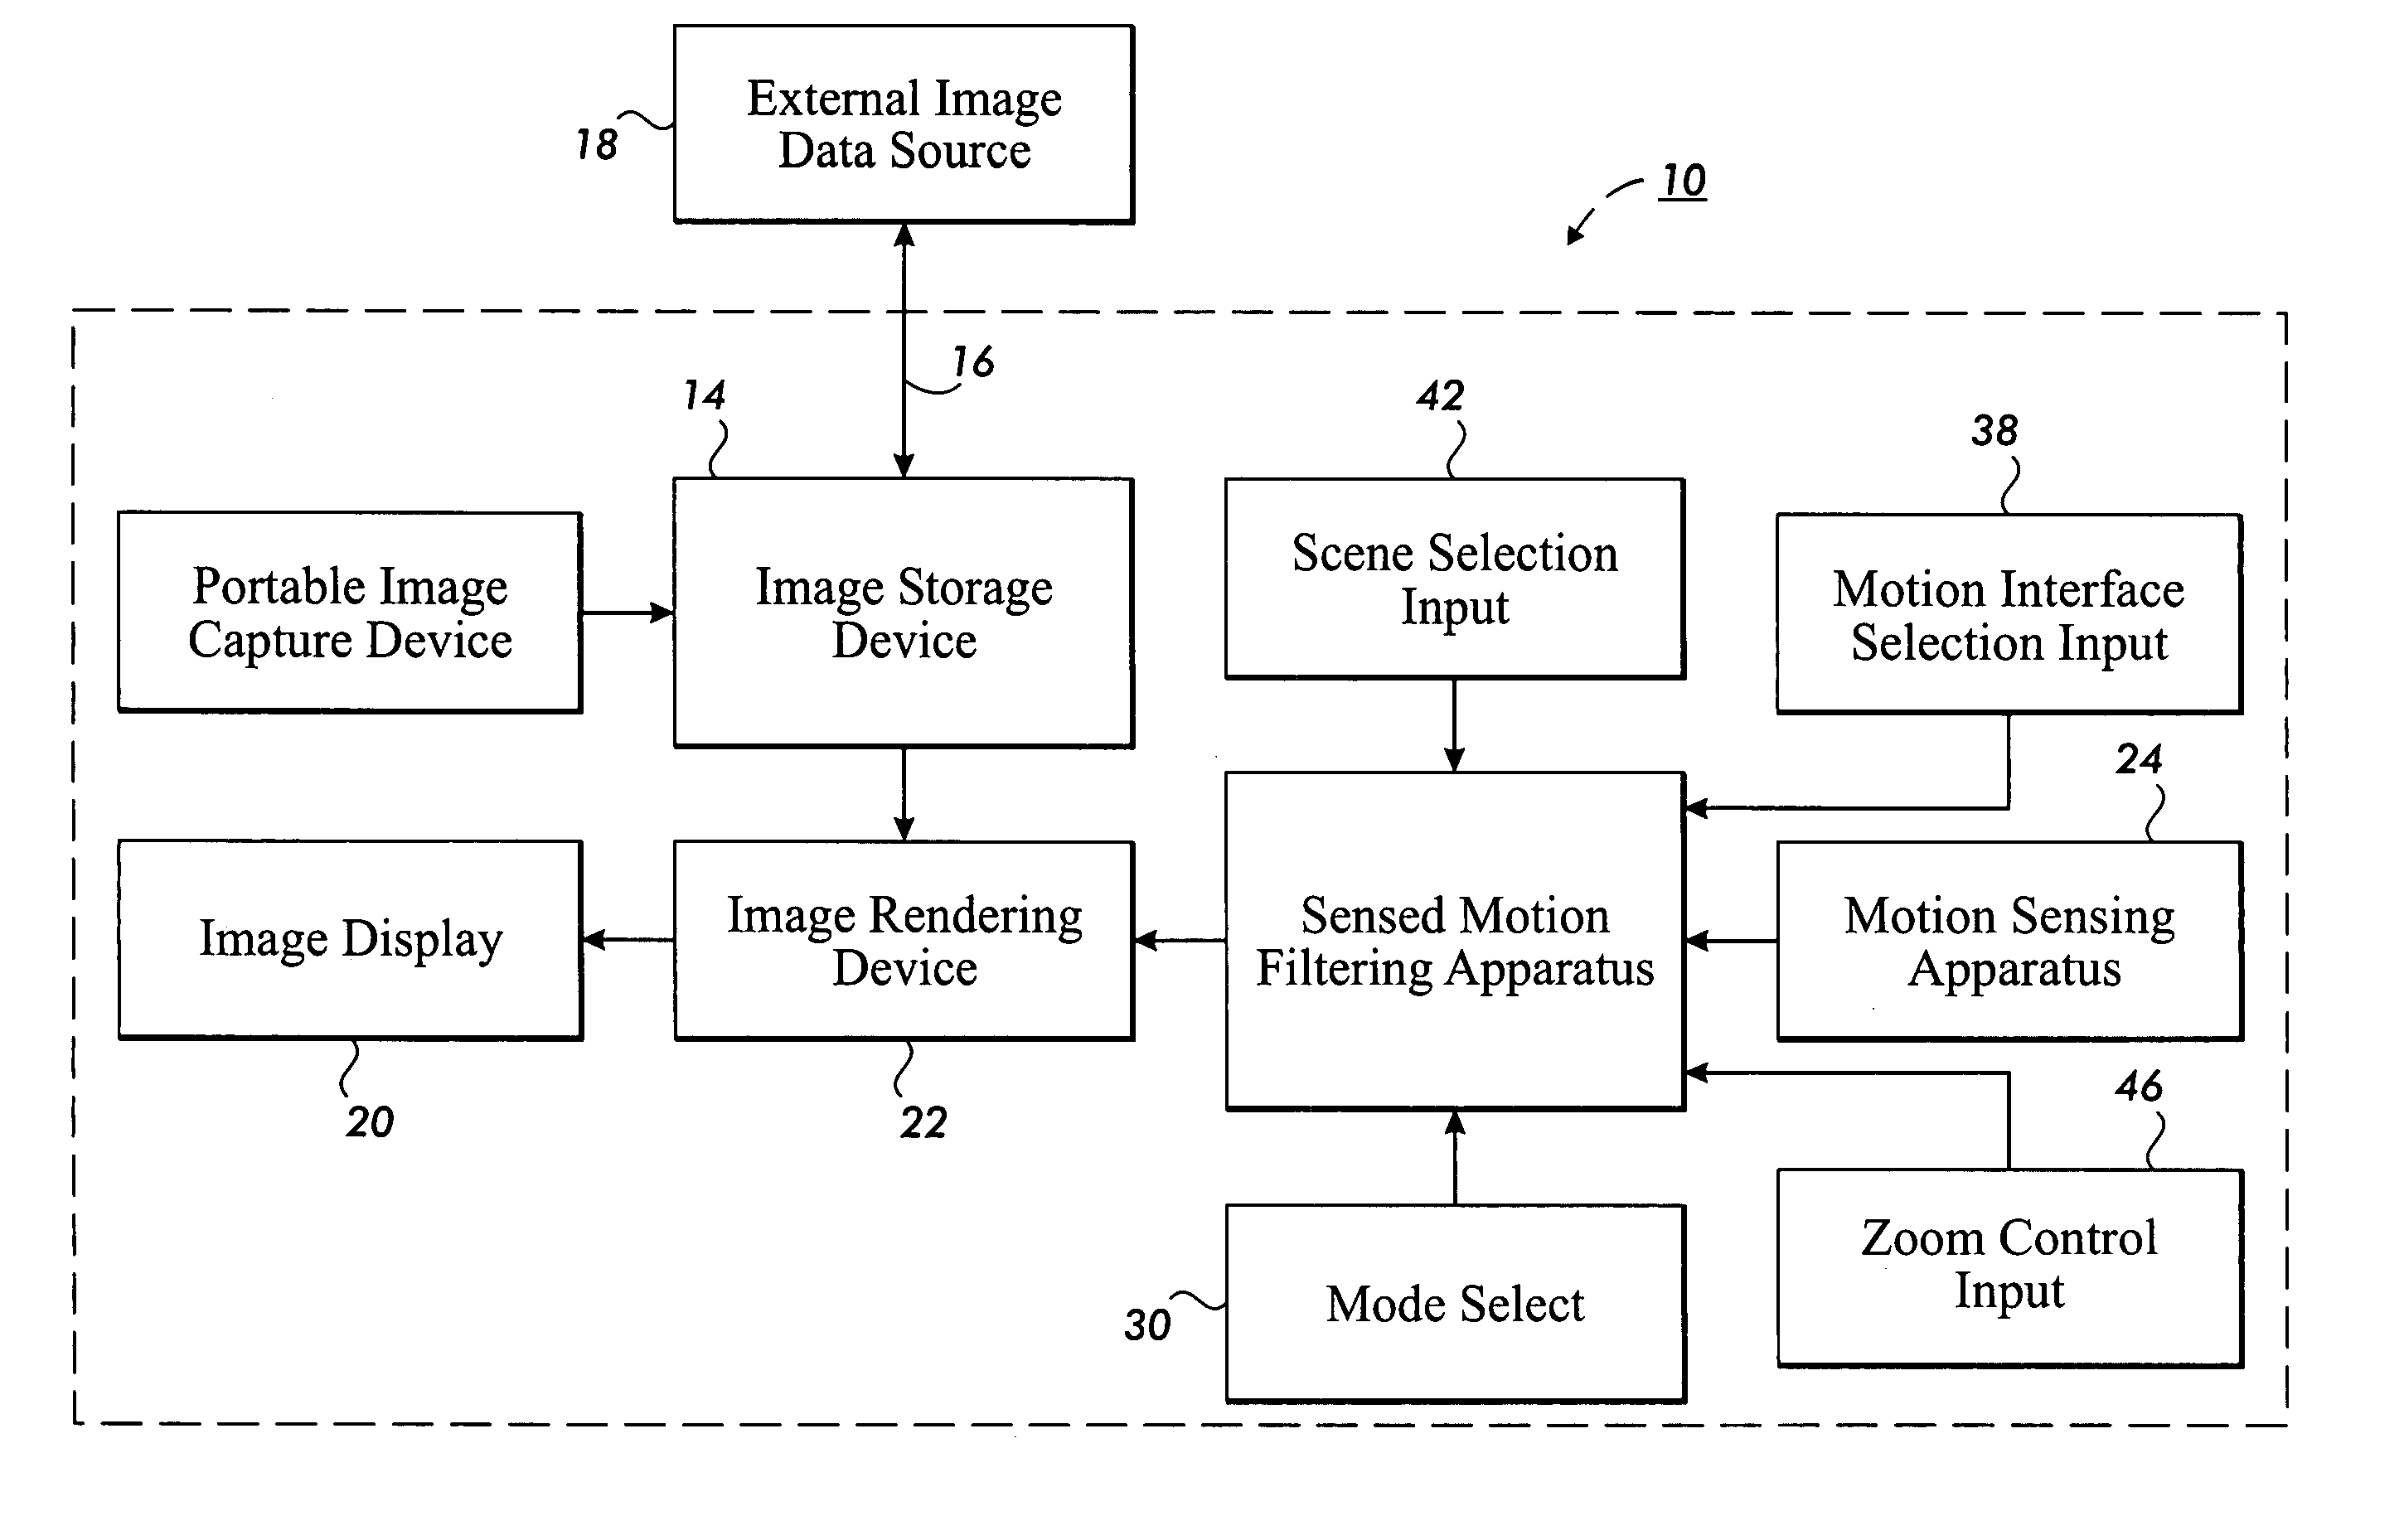 Display device for a camera